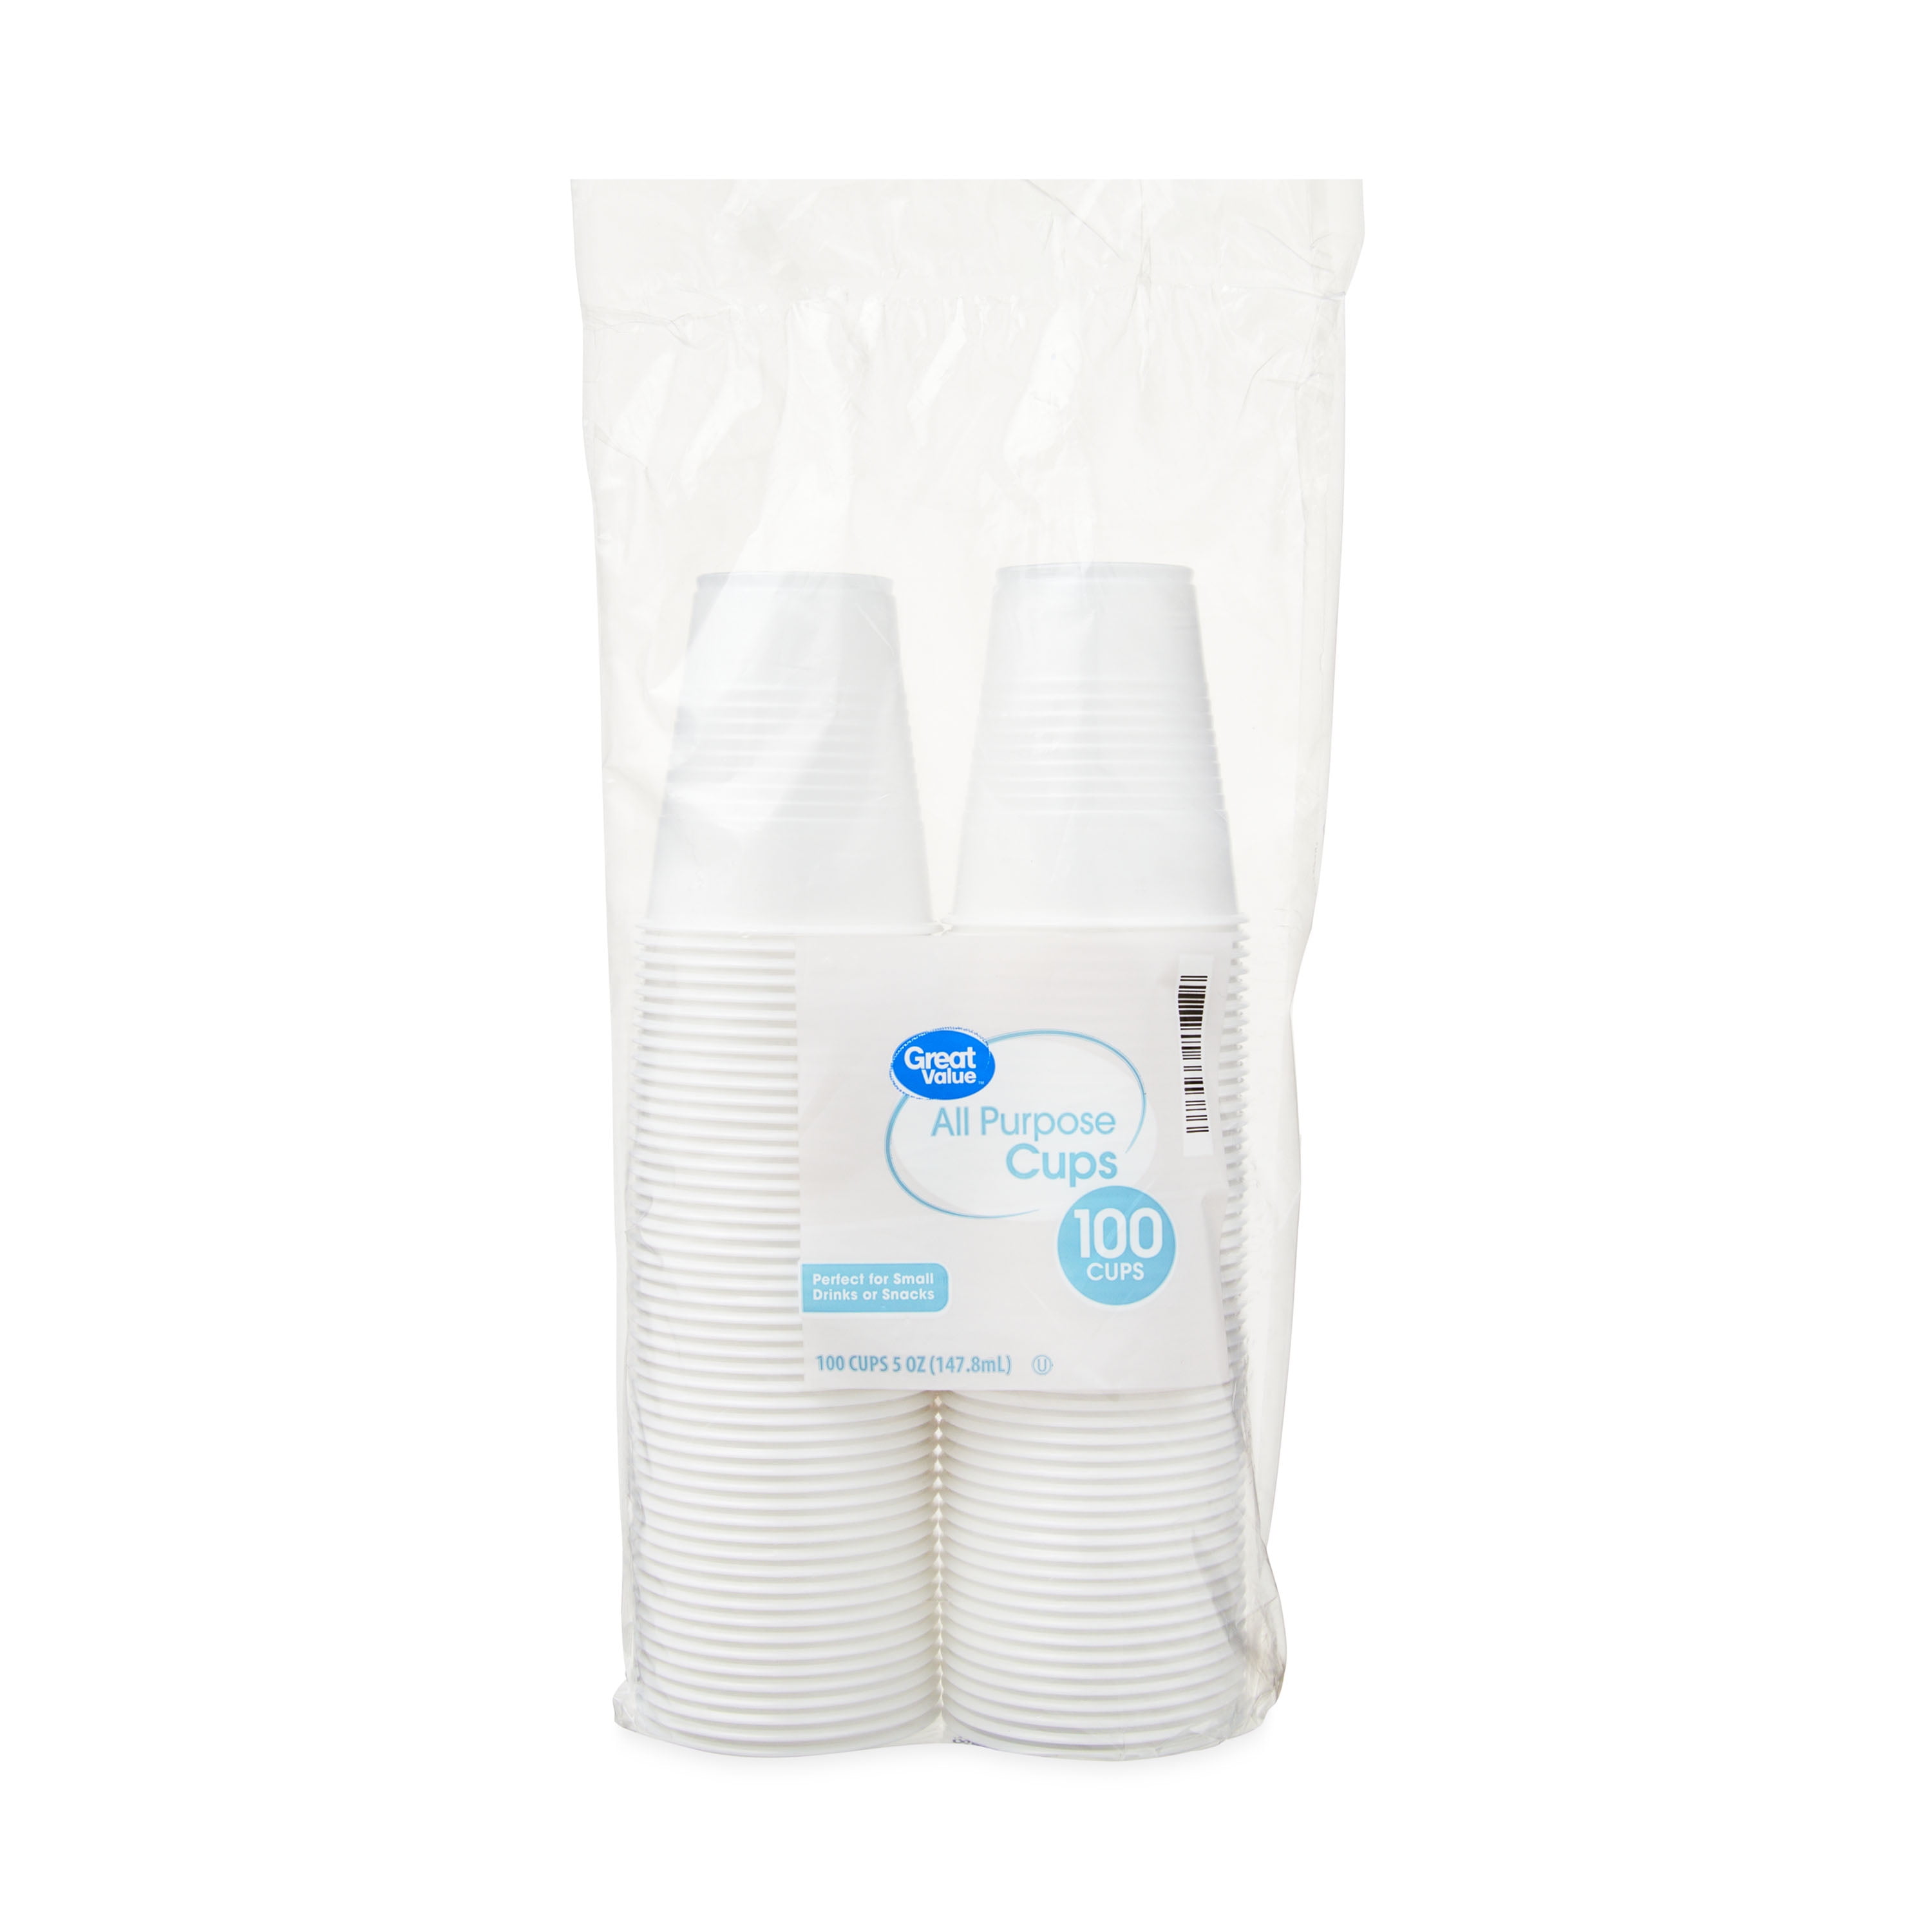 Upper Midland Products 5 Oz Plastic Cups, 500 CT 5 Oz Cups Small Plastic  Cups, These Small Disposabl…See more Upper Midland Products 5 Oz Plastic